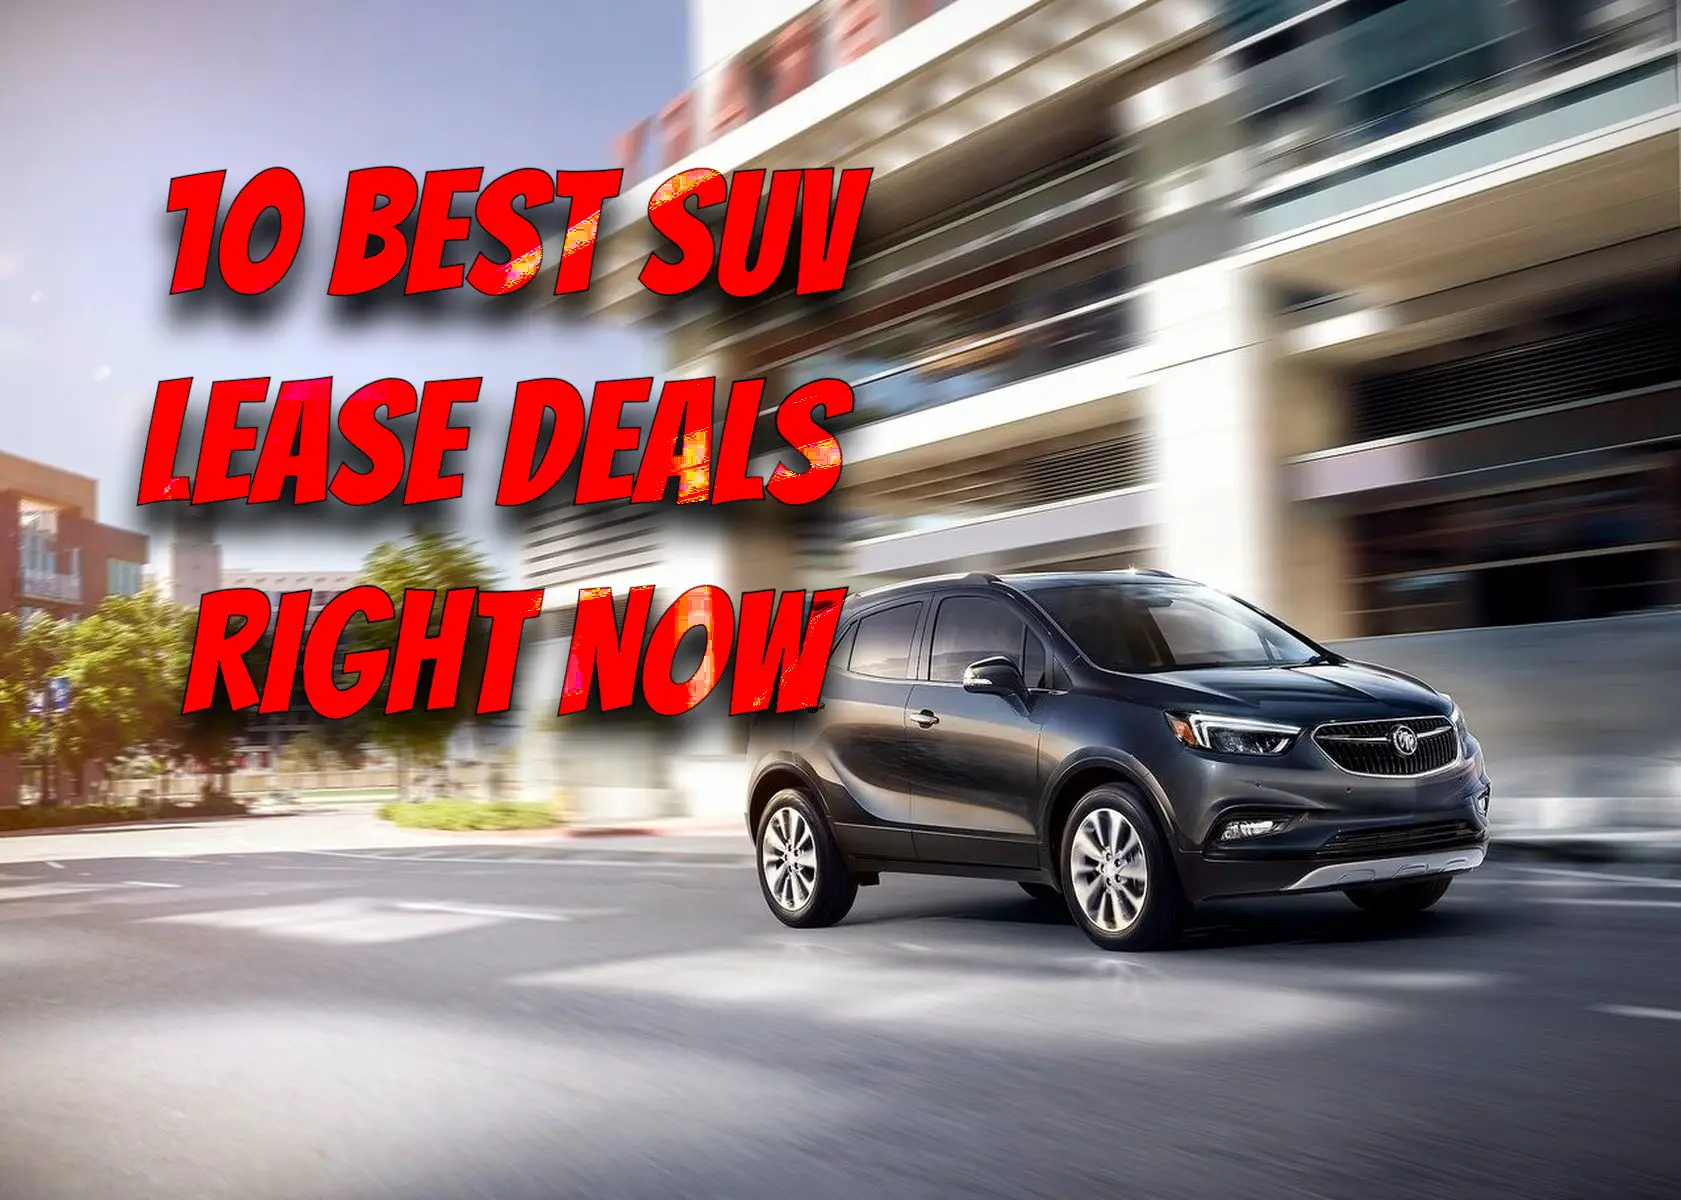 11 Best SUV Lease Deals Right Now: Most Affordable Crossover in 2021